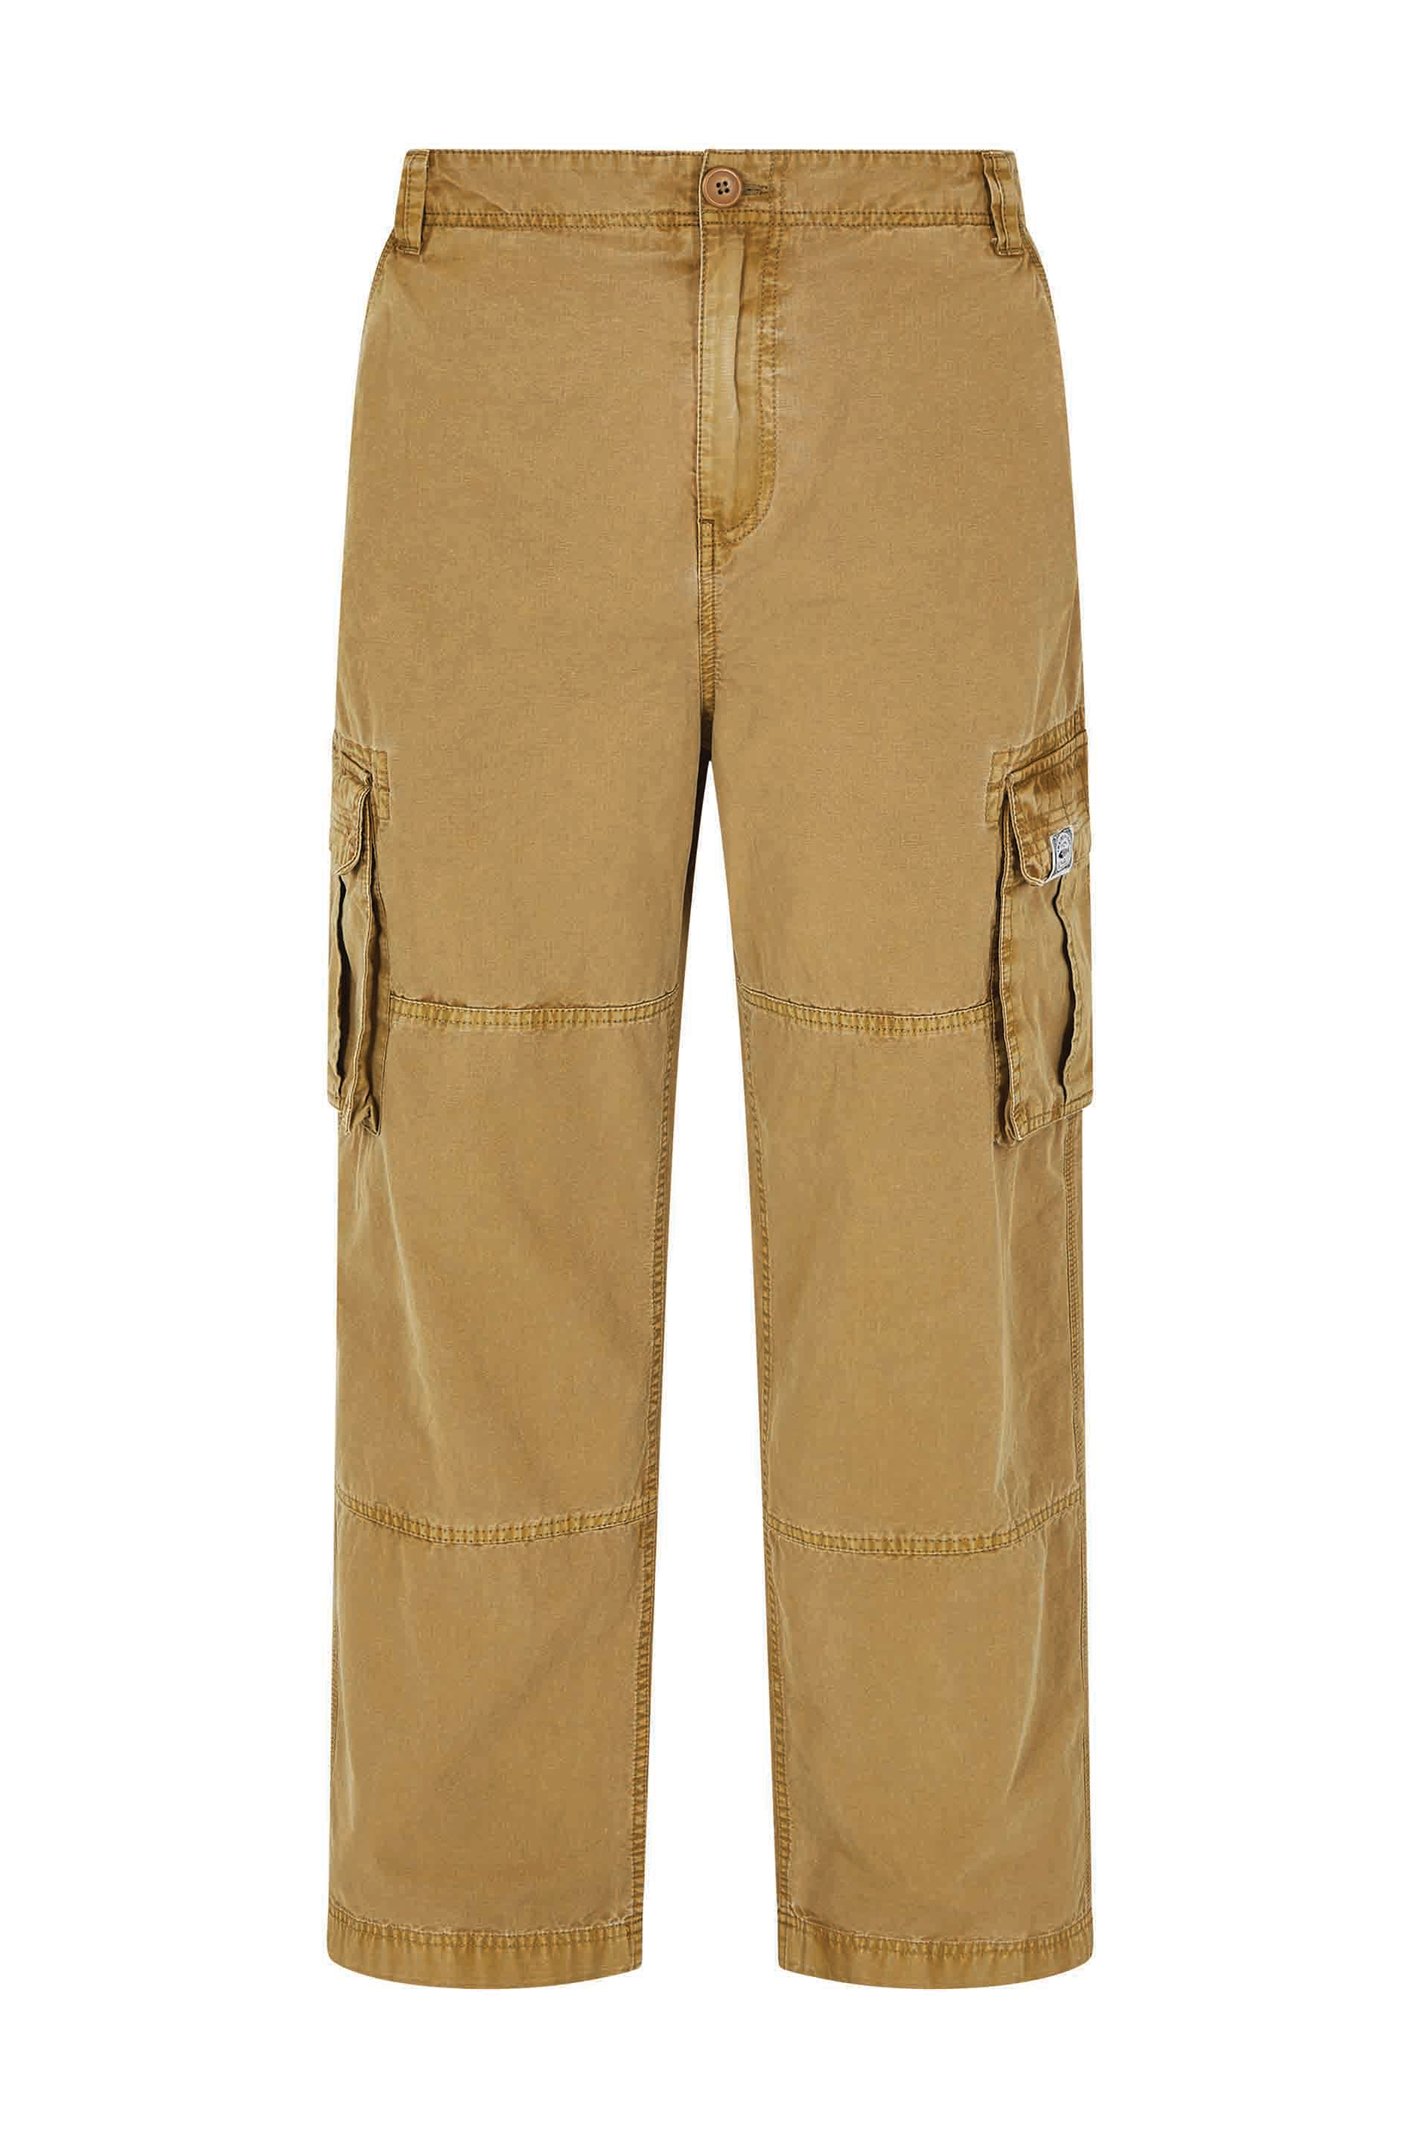 Weird Fish Turner Cargo Trousers Antique Tan Size 30